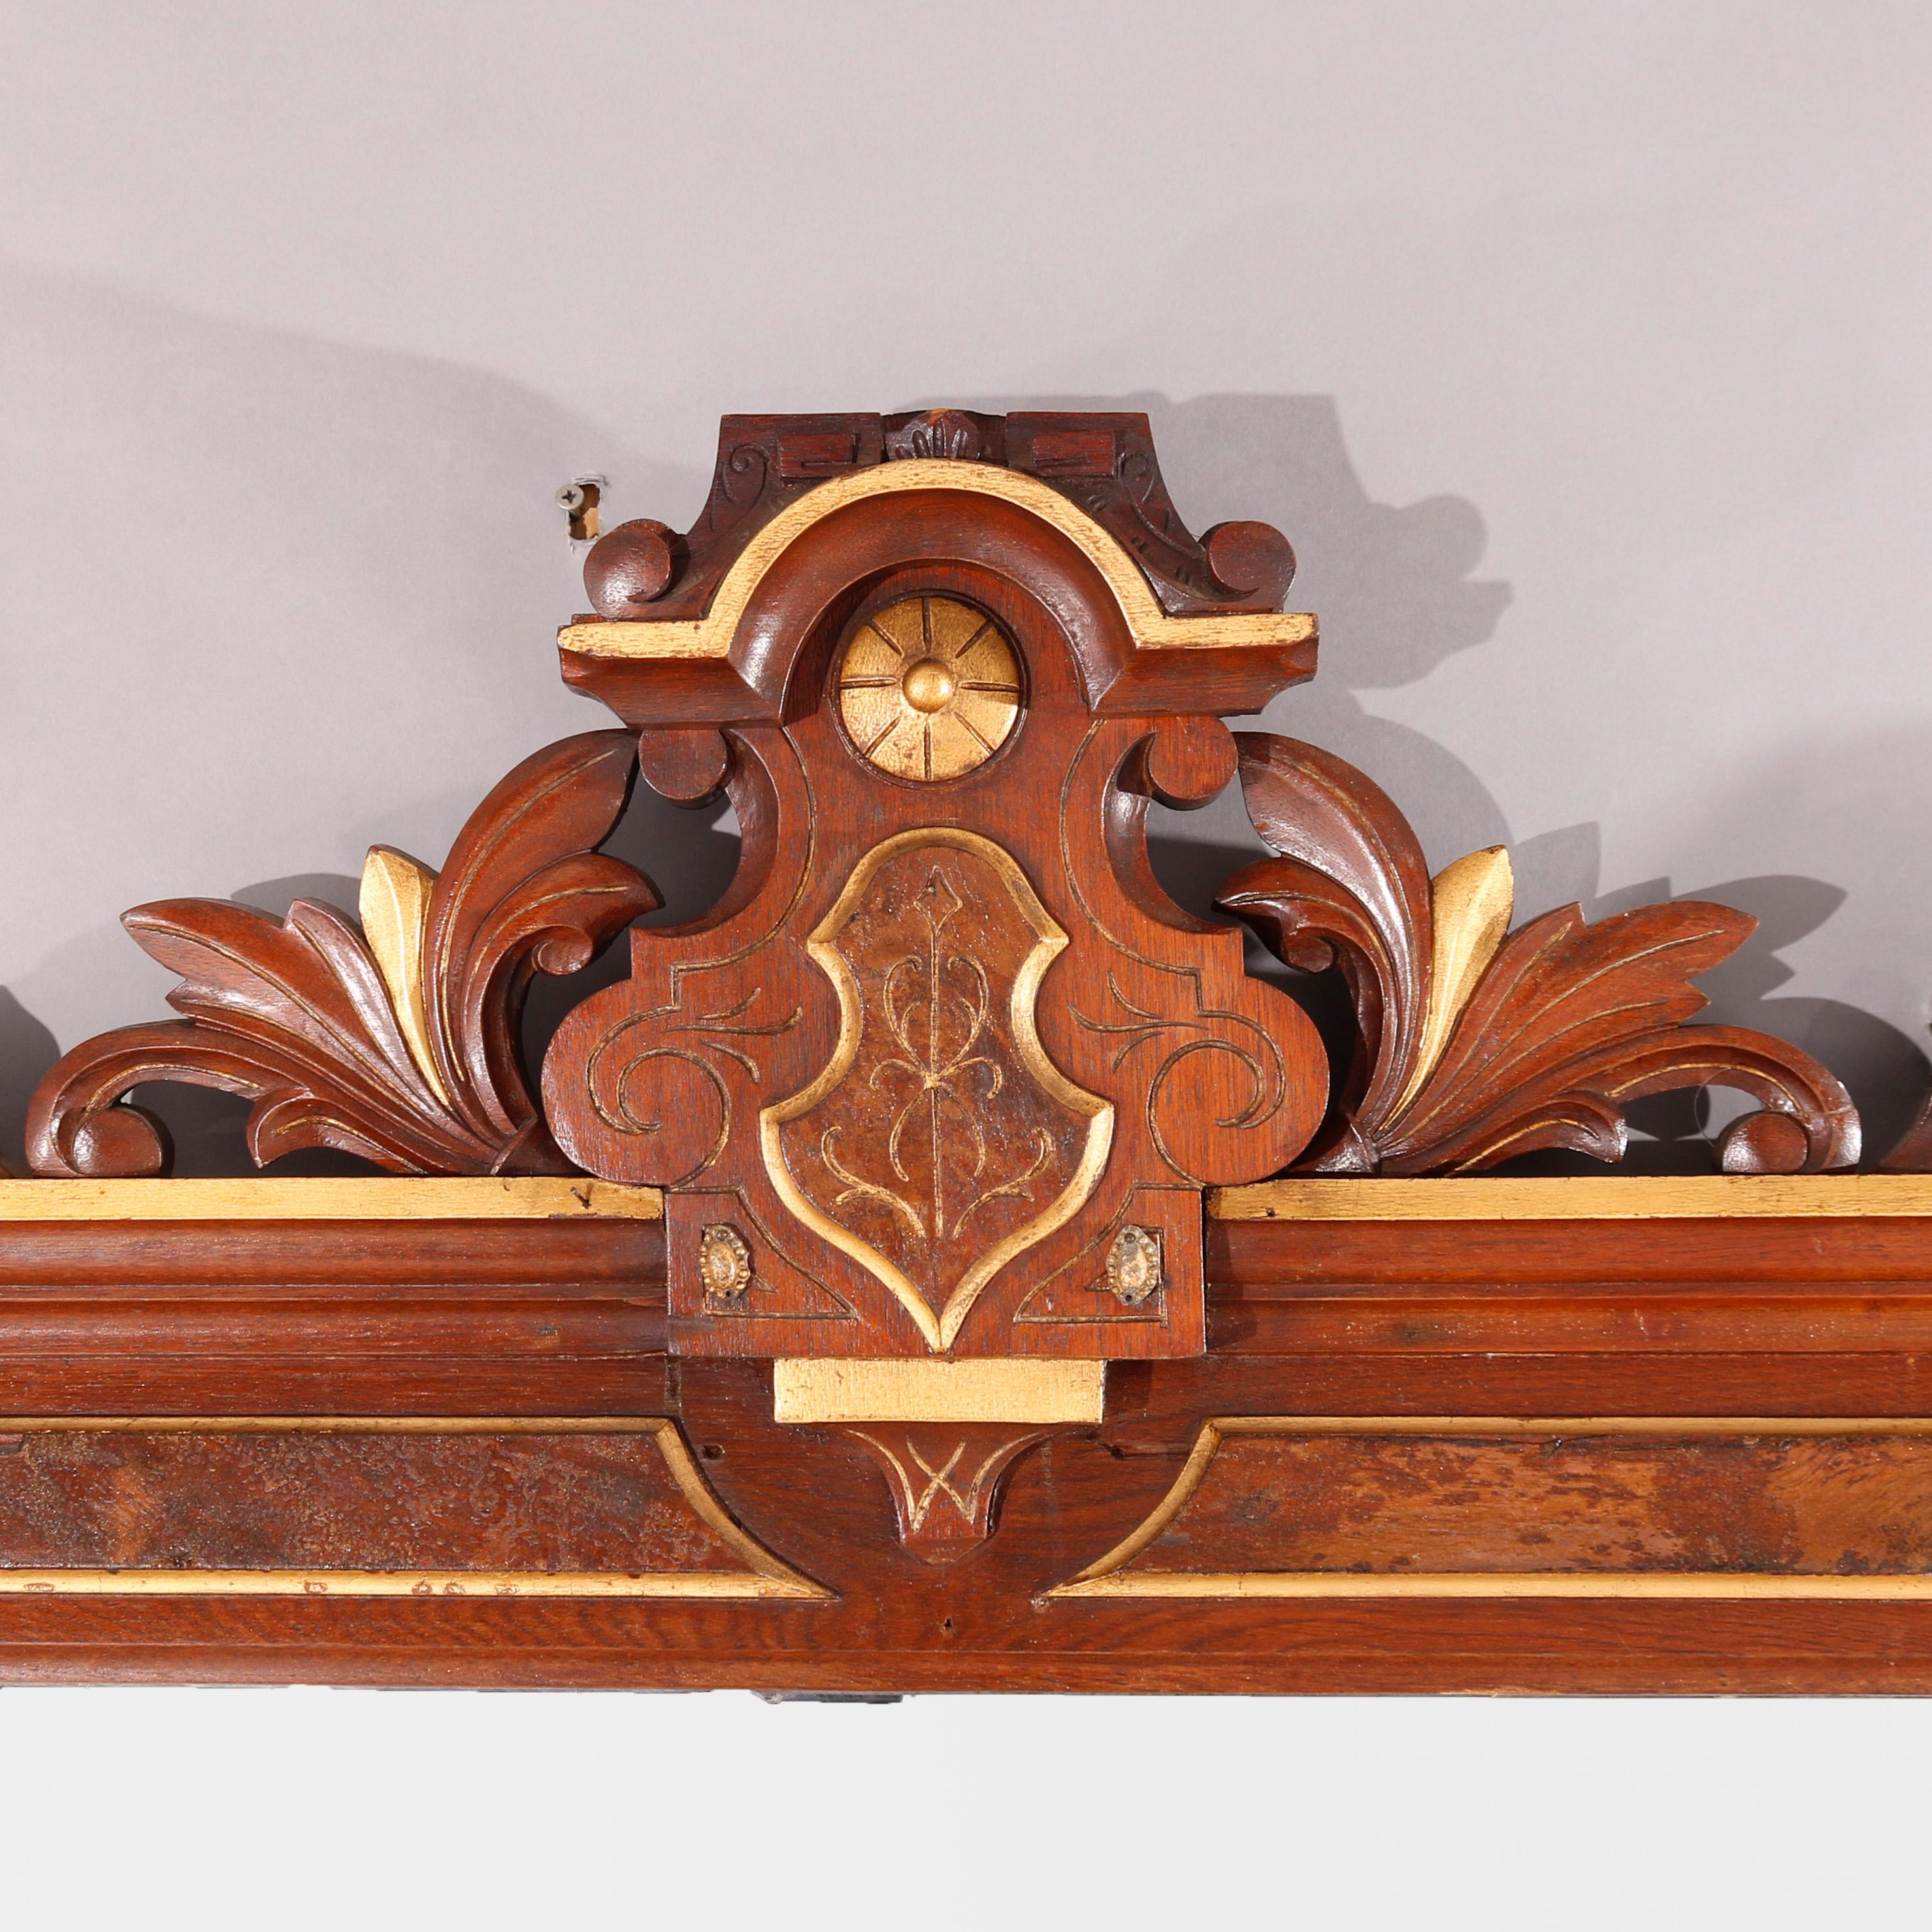 An antique Renaissance Revival over mantle mirror offers walnut construction with stylized foliate crest over framed mirror with burl inset and gilt highlights throughout, circa 1880

Measures - 74.5